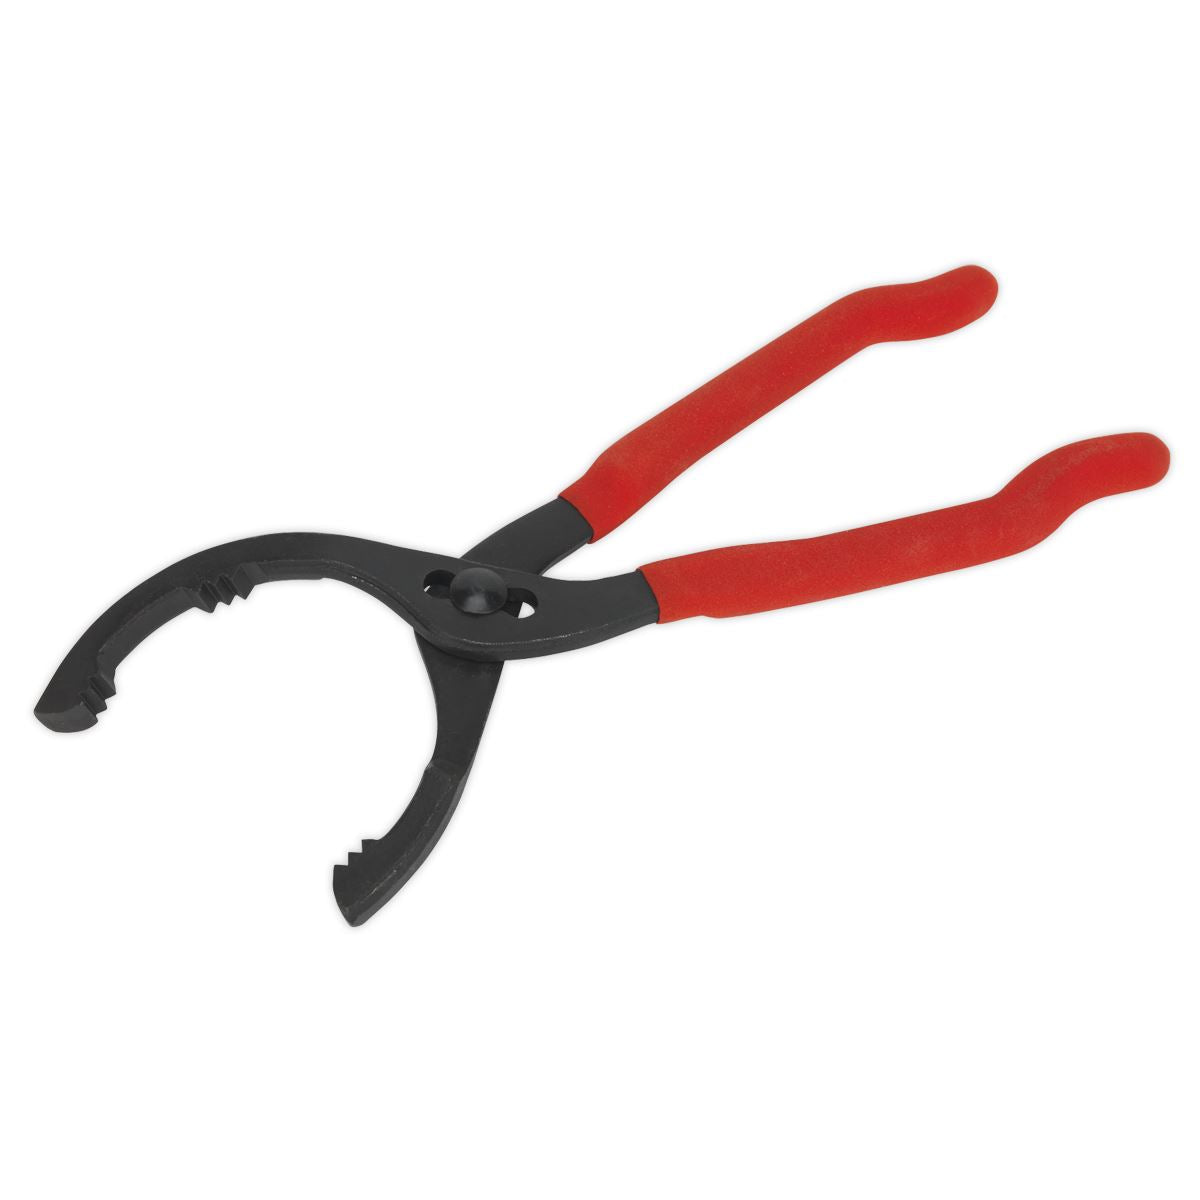 Sealey Oil Filter Pliers 60-108mm Capacity Car Service Tools Wrench